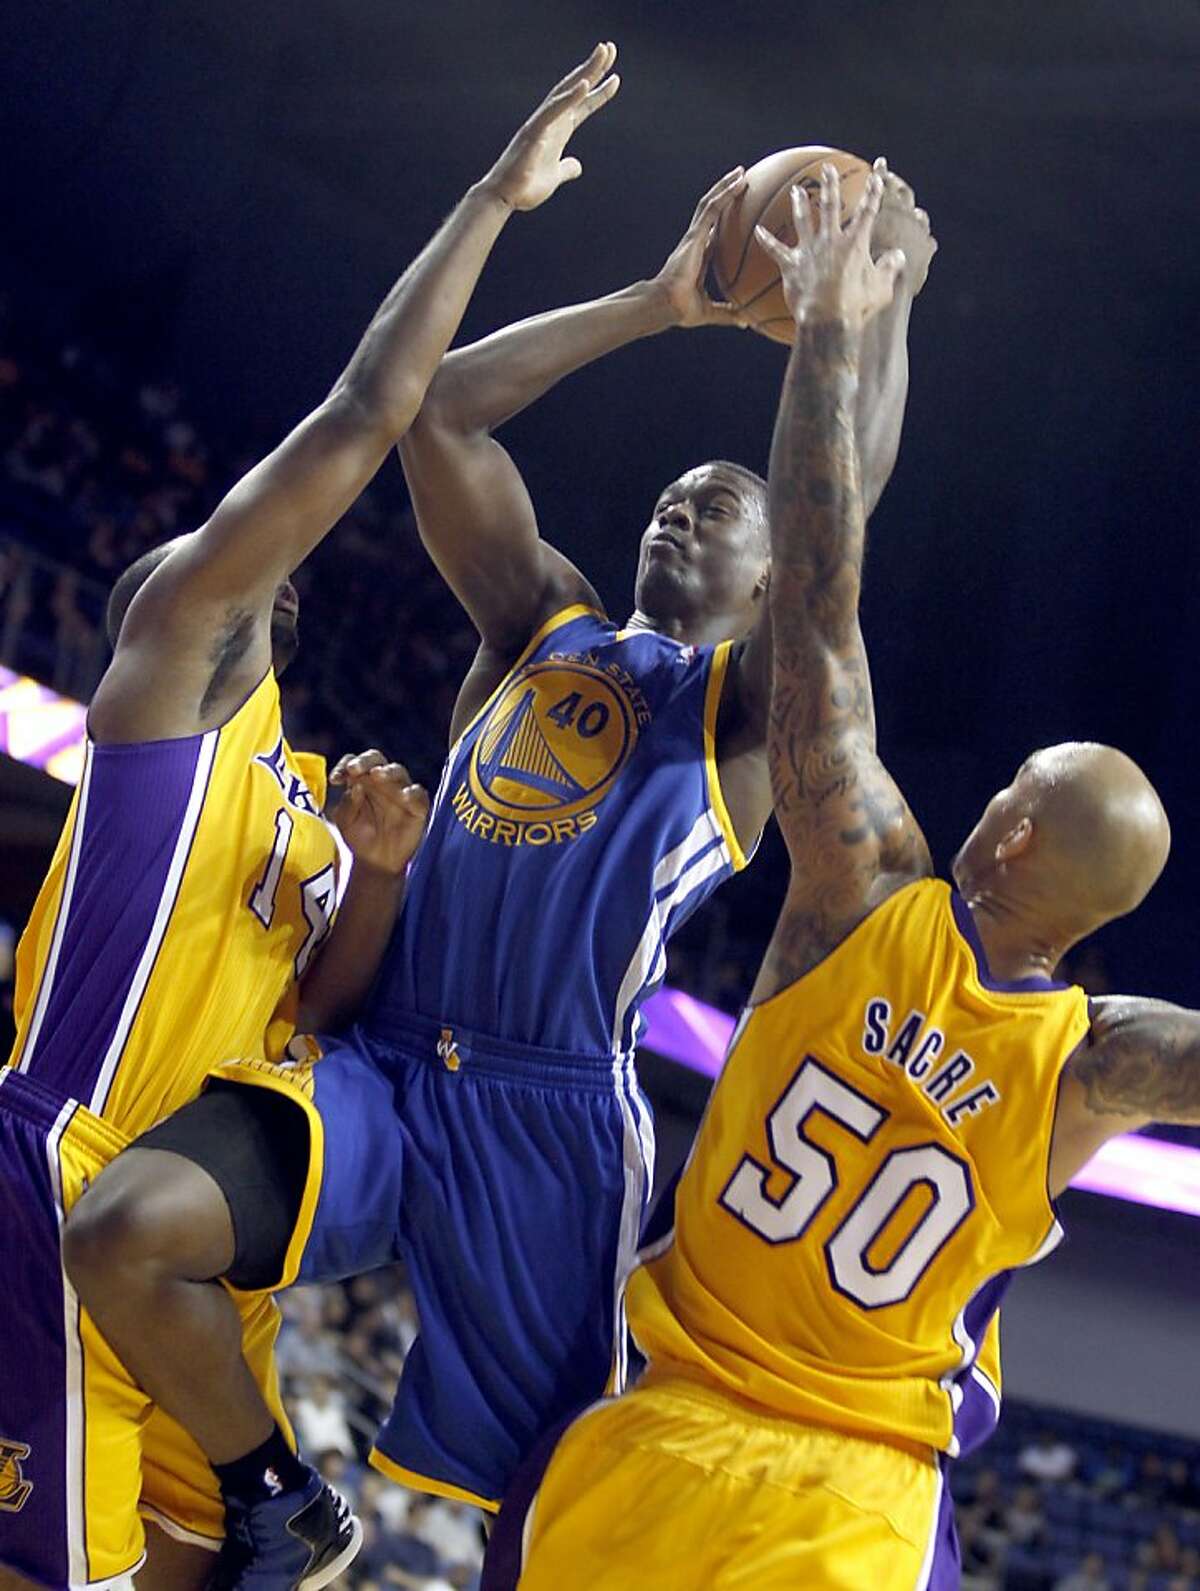 Golden State Warriors forward Harrison Barnes, center, splits the defense of Los Angeles Lakers forward Marcus Landry, left, and Lakers center Robert Sacre (50) in the fourth quarter during an NBA basketball preseason game Saturday, Oct. 5, 2013, in Ontario, Calif. Lakers won the game 104-95. (AP Photo/Alex Gallardo)